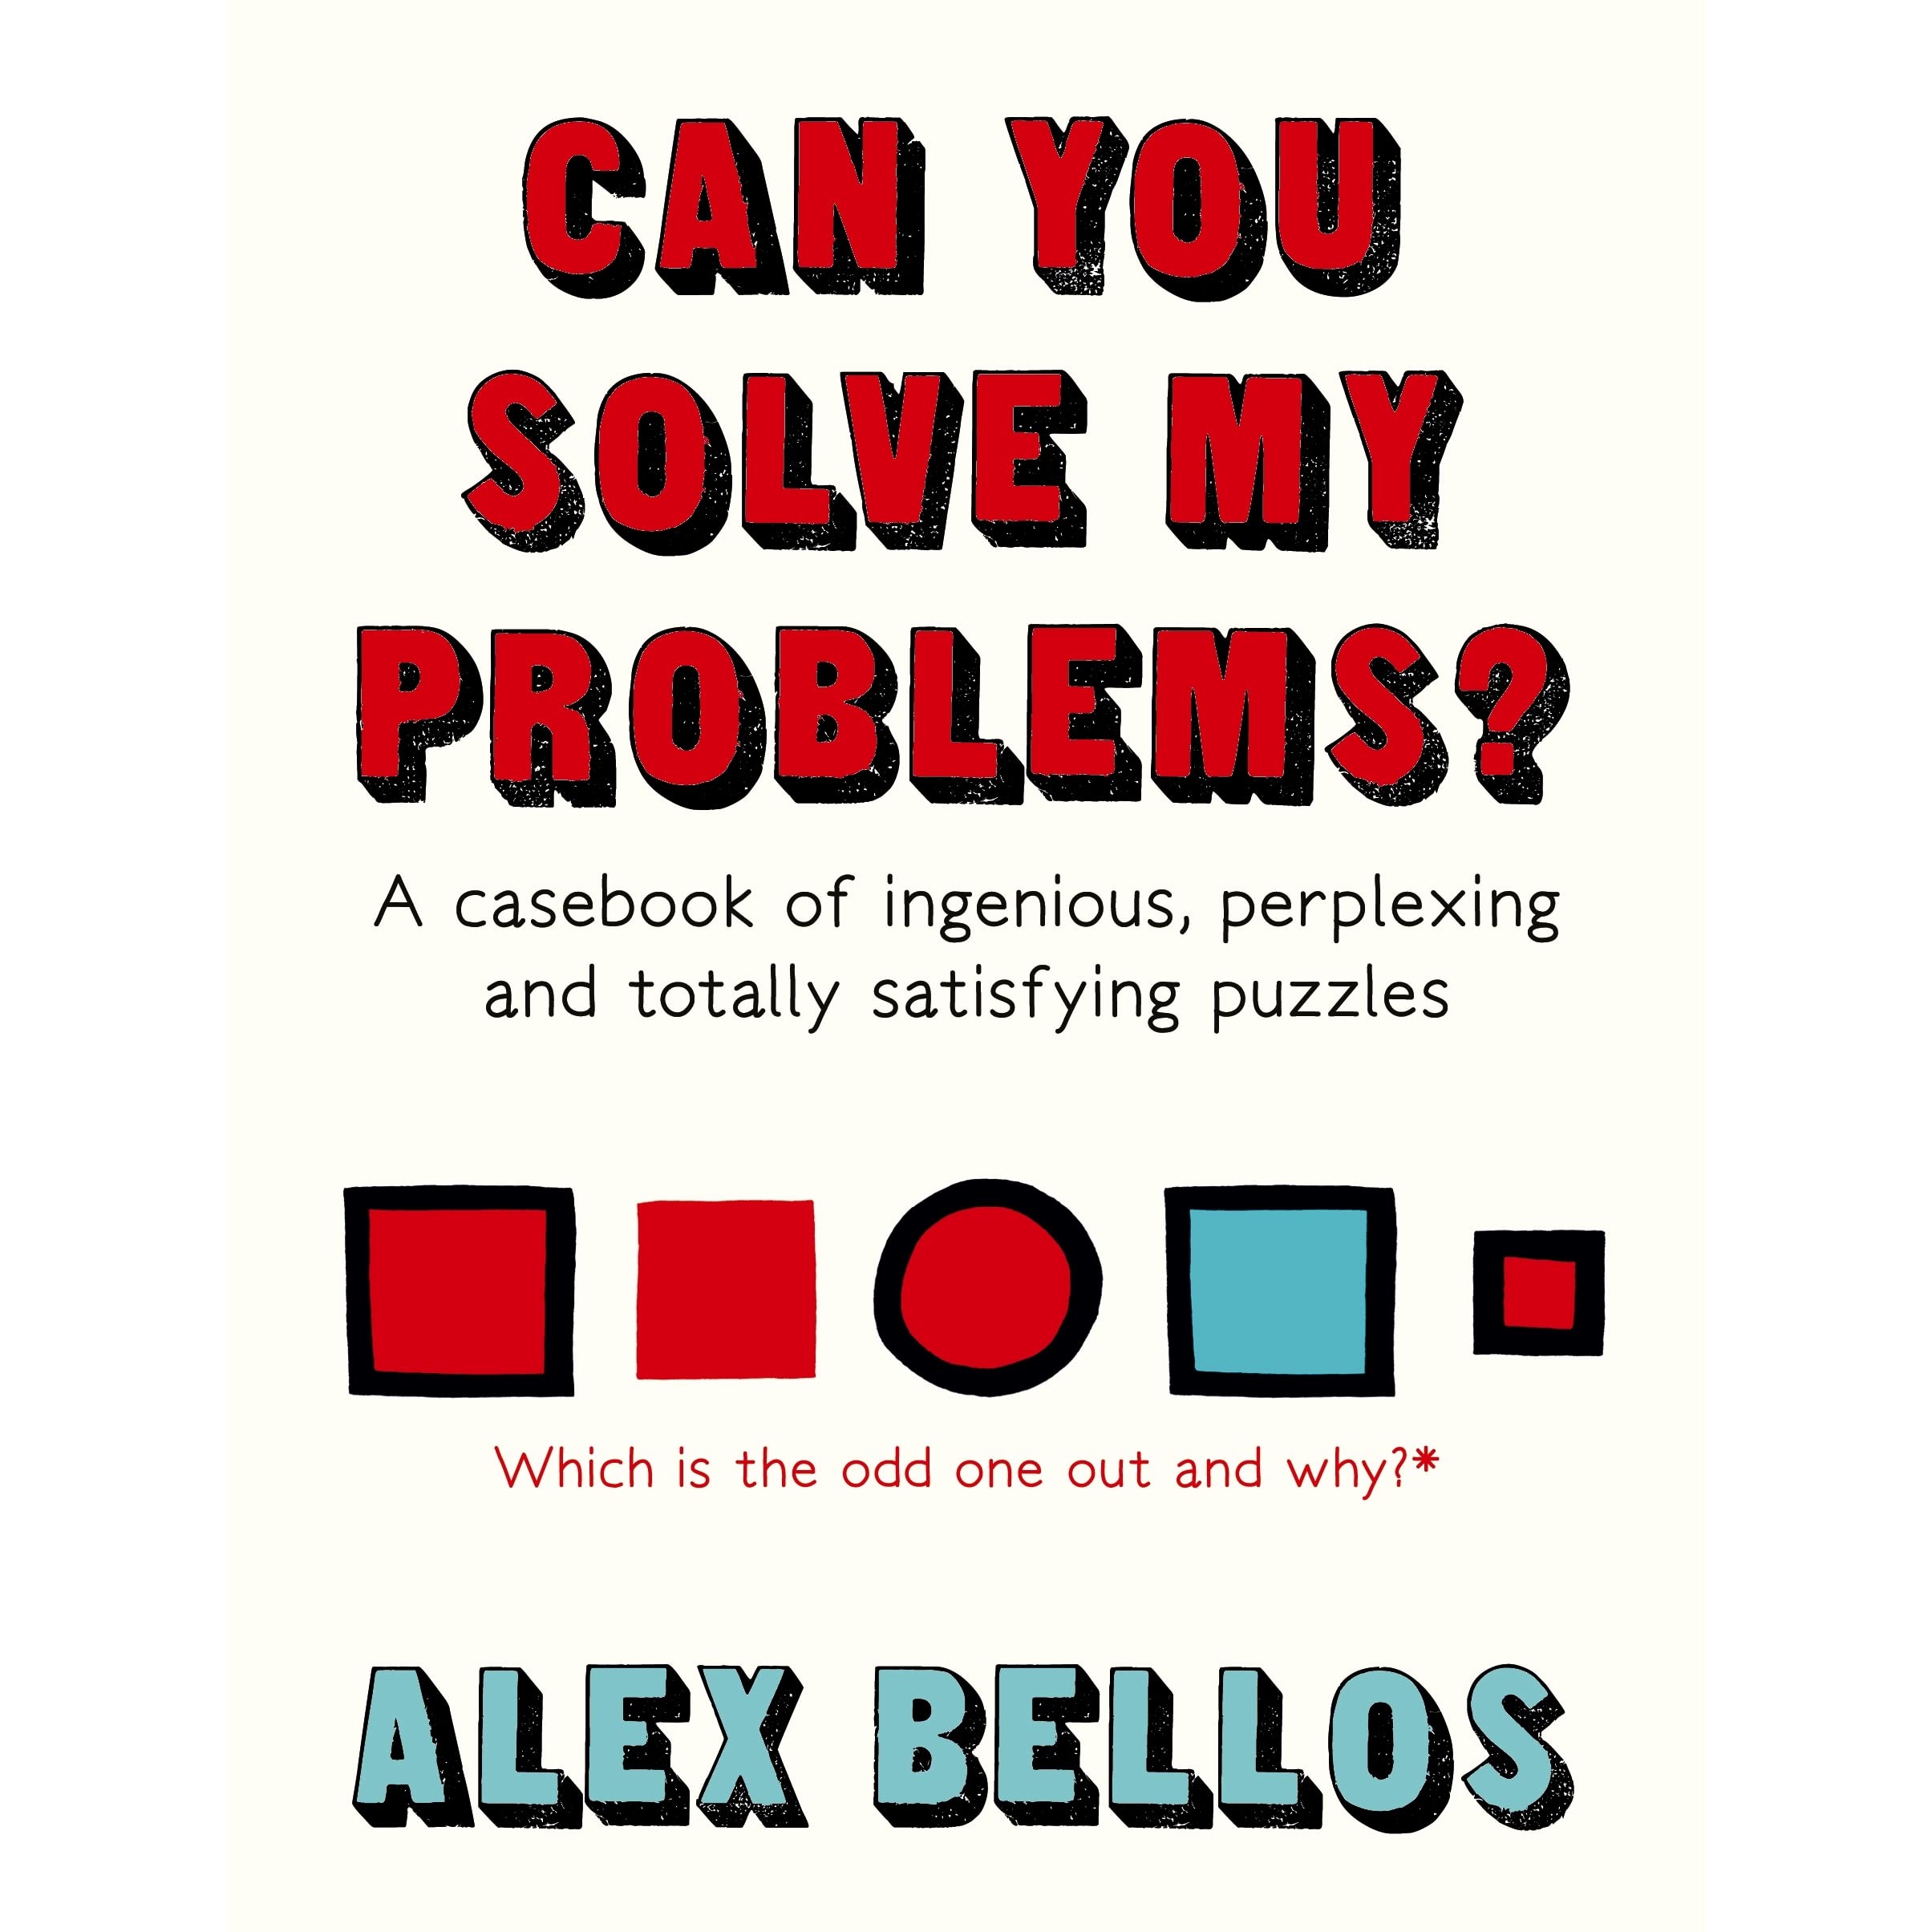 Can You Solve My Problems?: A Casebook of Ingenious, Perplexing and Totally Satisfying Puzzles